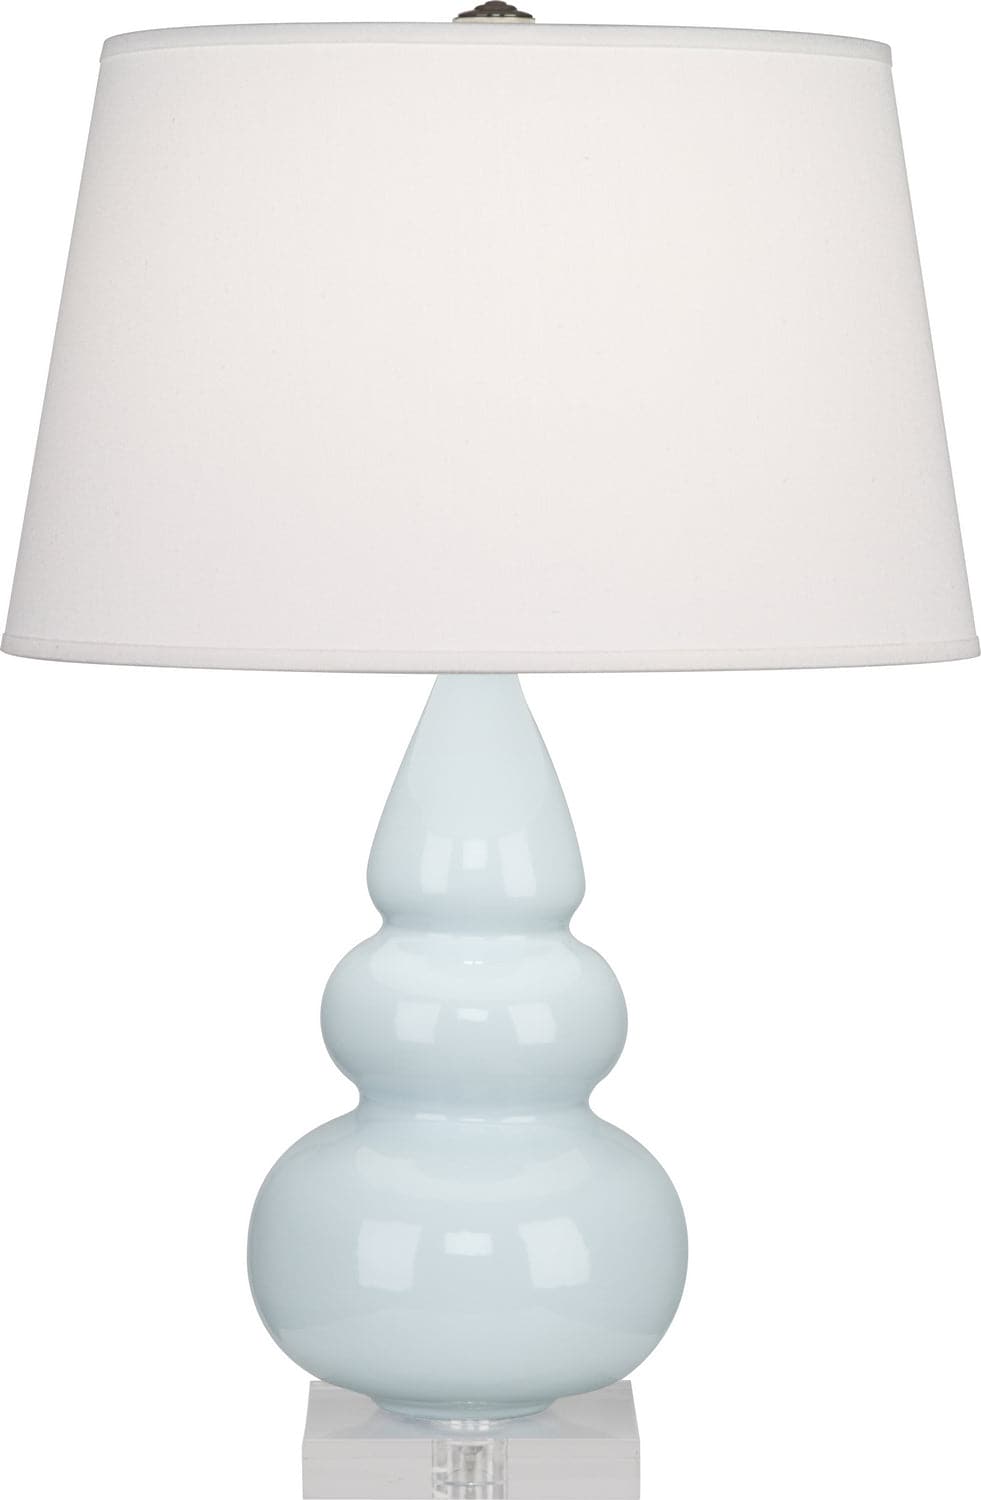 Robert Abbey - A291X - One Light Accent Lamp - Small Triple Gourd - Baby Blue Glazed w/Lucite Base